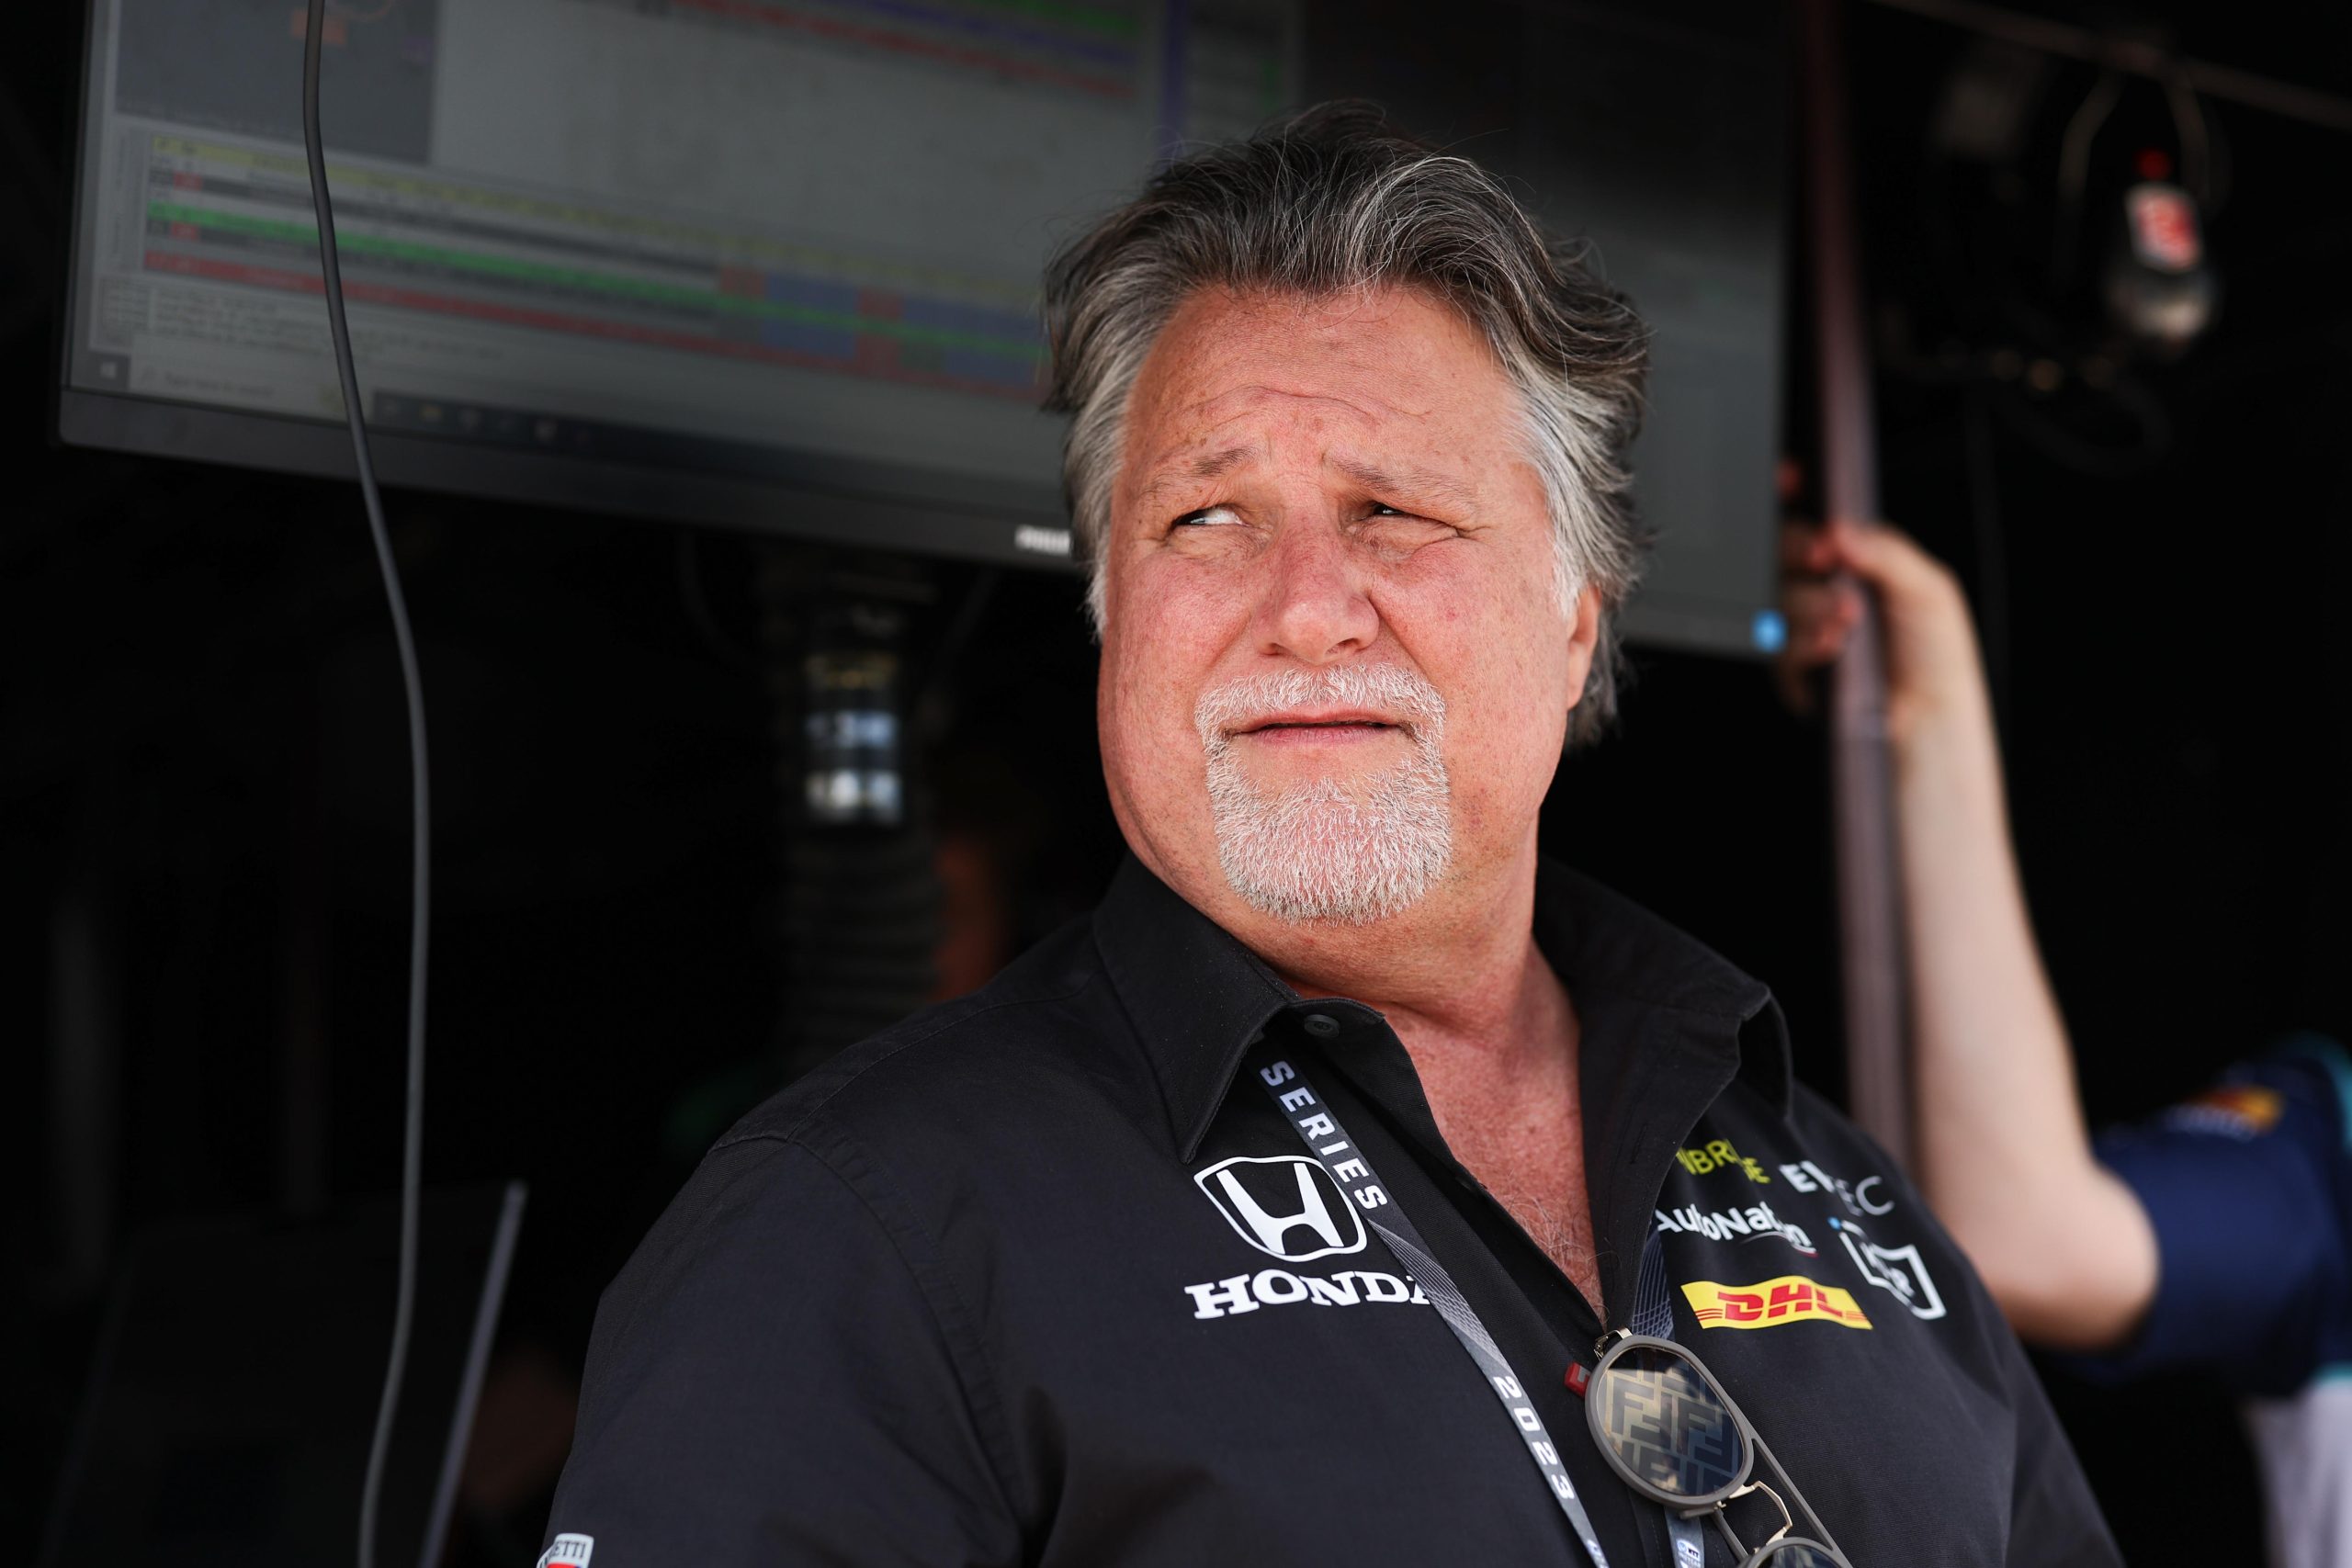 Andretti plan to employ over 1,000 personnel in F1 team